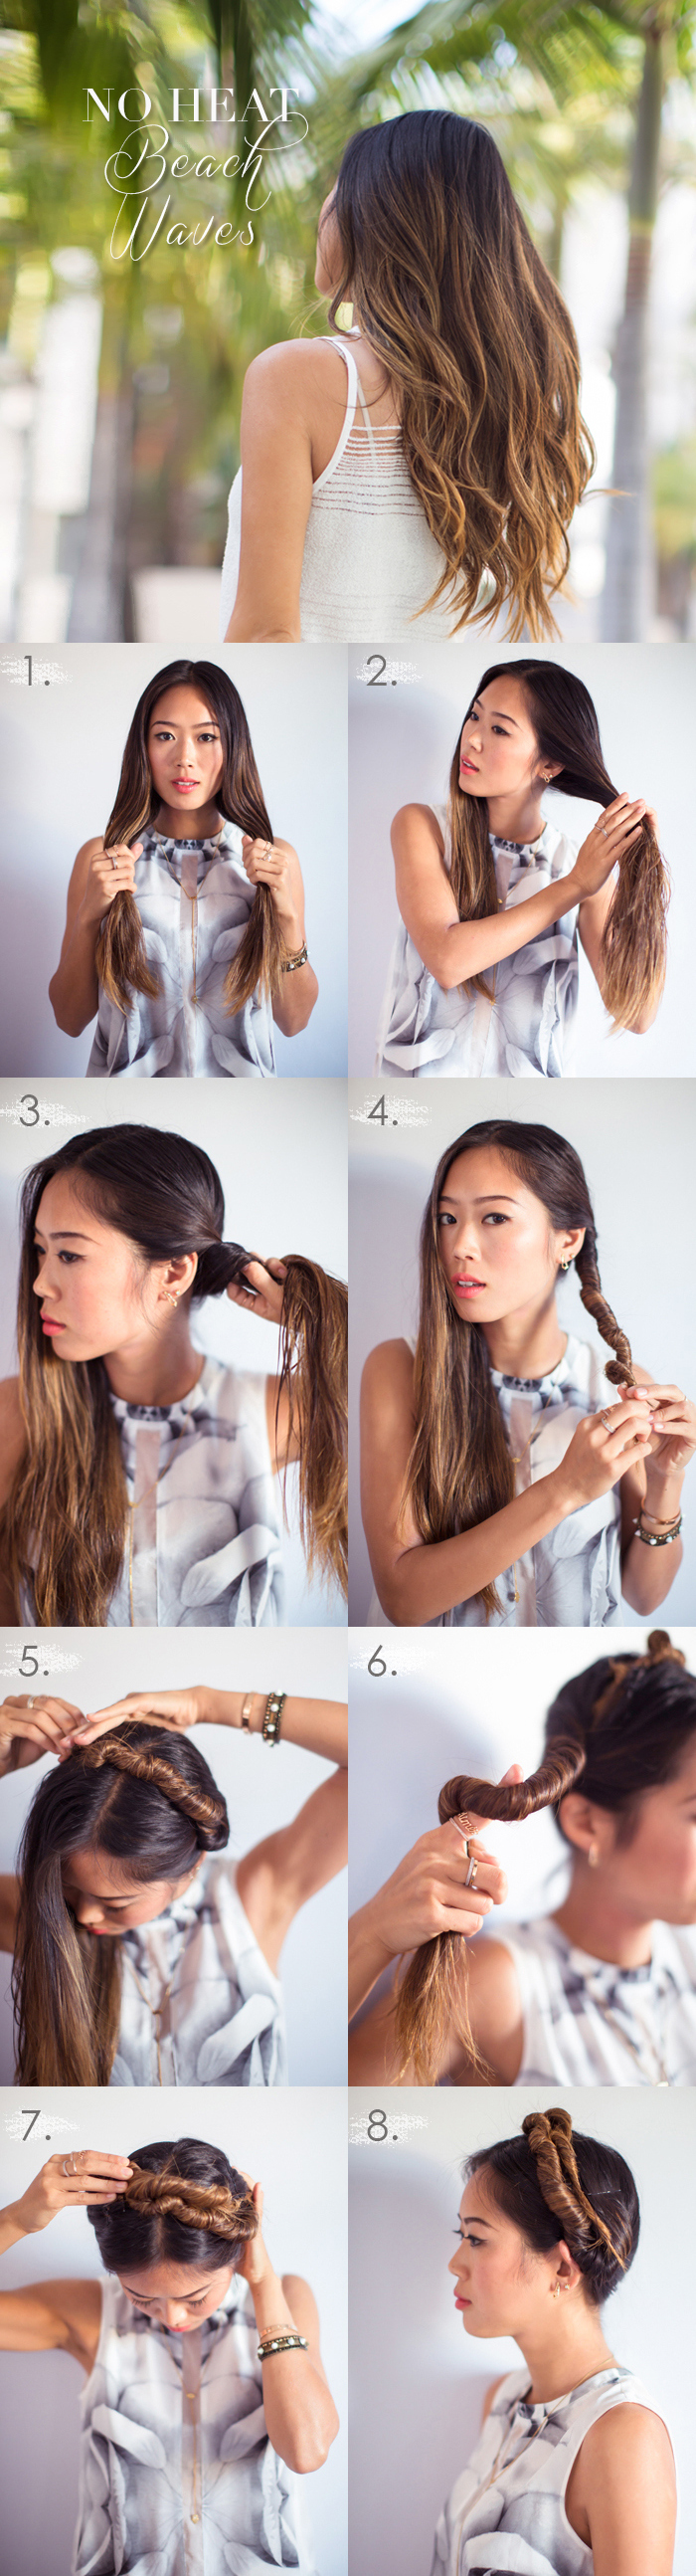 Want to look fabulous this monsoon? Flaunt these 4 sassy hairstyles |  TheHealthSite.com